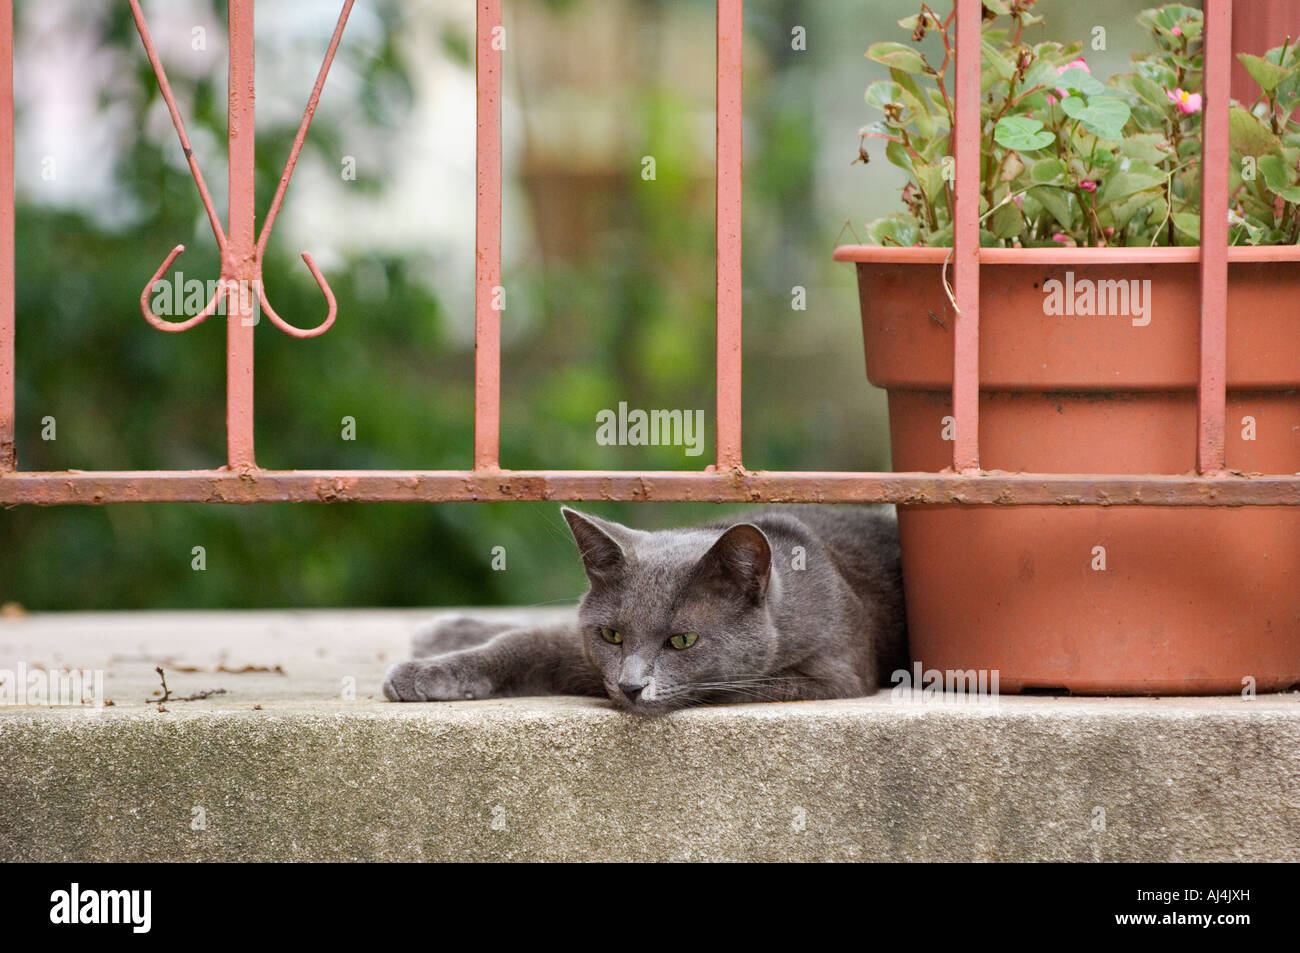 Bored Gray Cat on Concrete Stoop Beside Potted Plant Louisville Kentucky Stock Photo